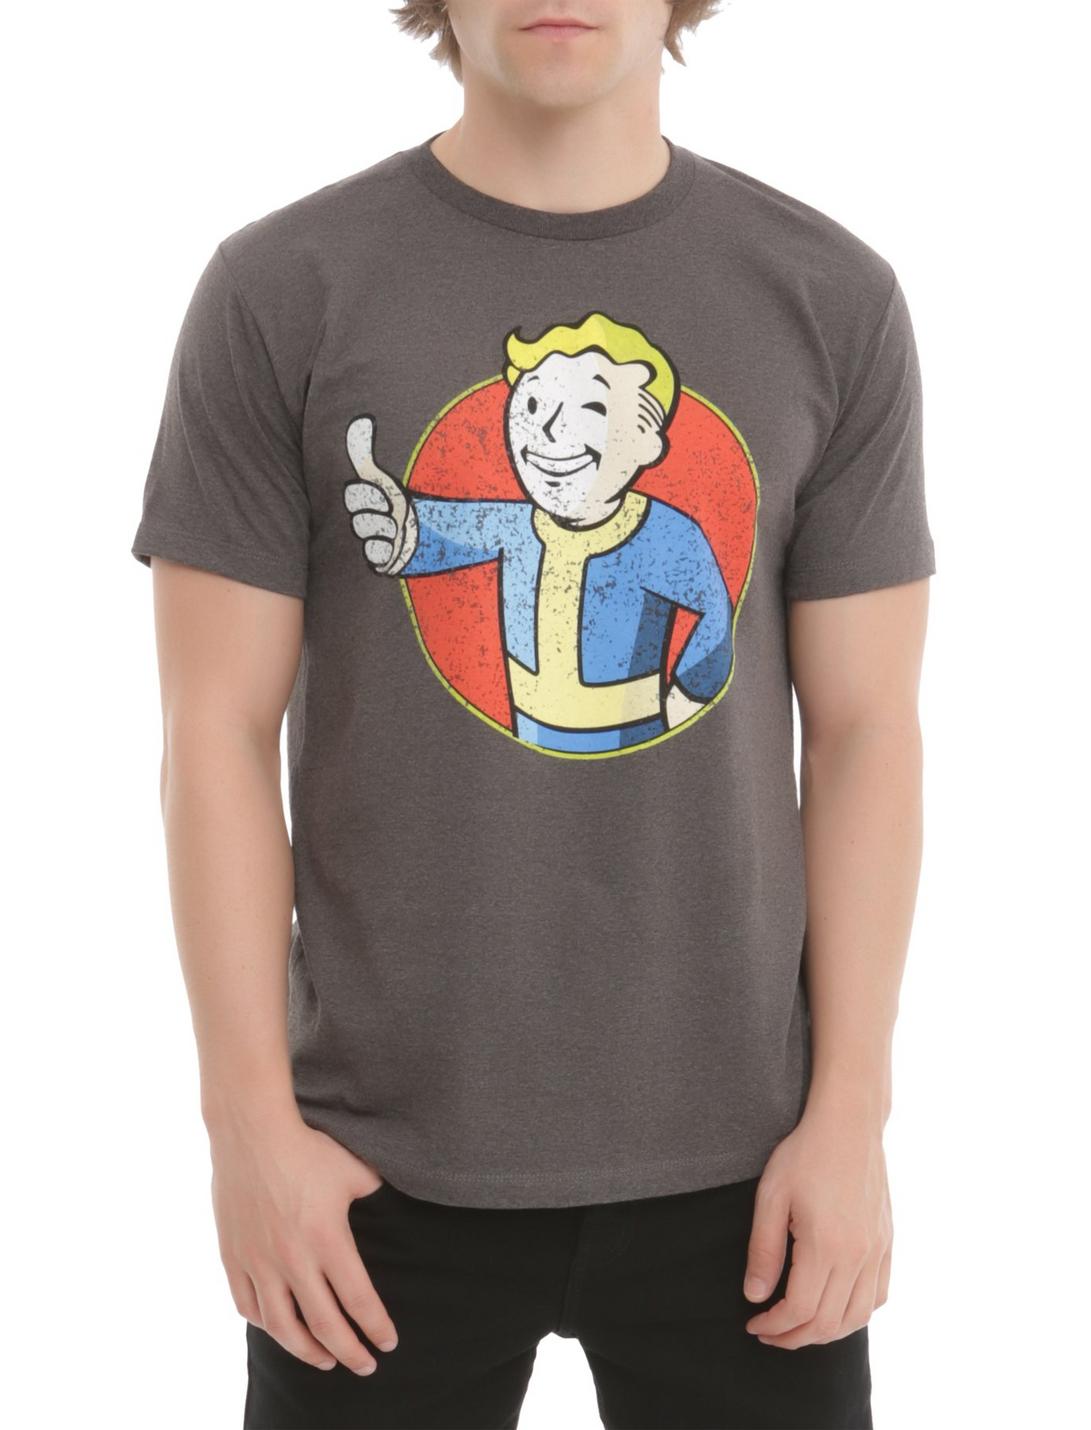 FALLOUT 4 VAULT BOY VAULT FOREVER UNISEX T-SHIRT FOR ADULTS FREE SHIP 